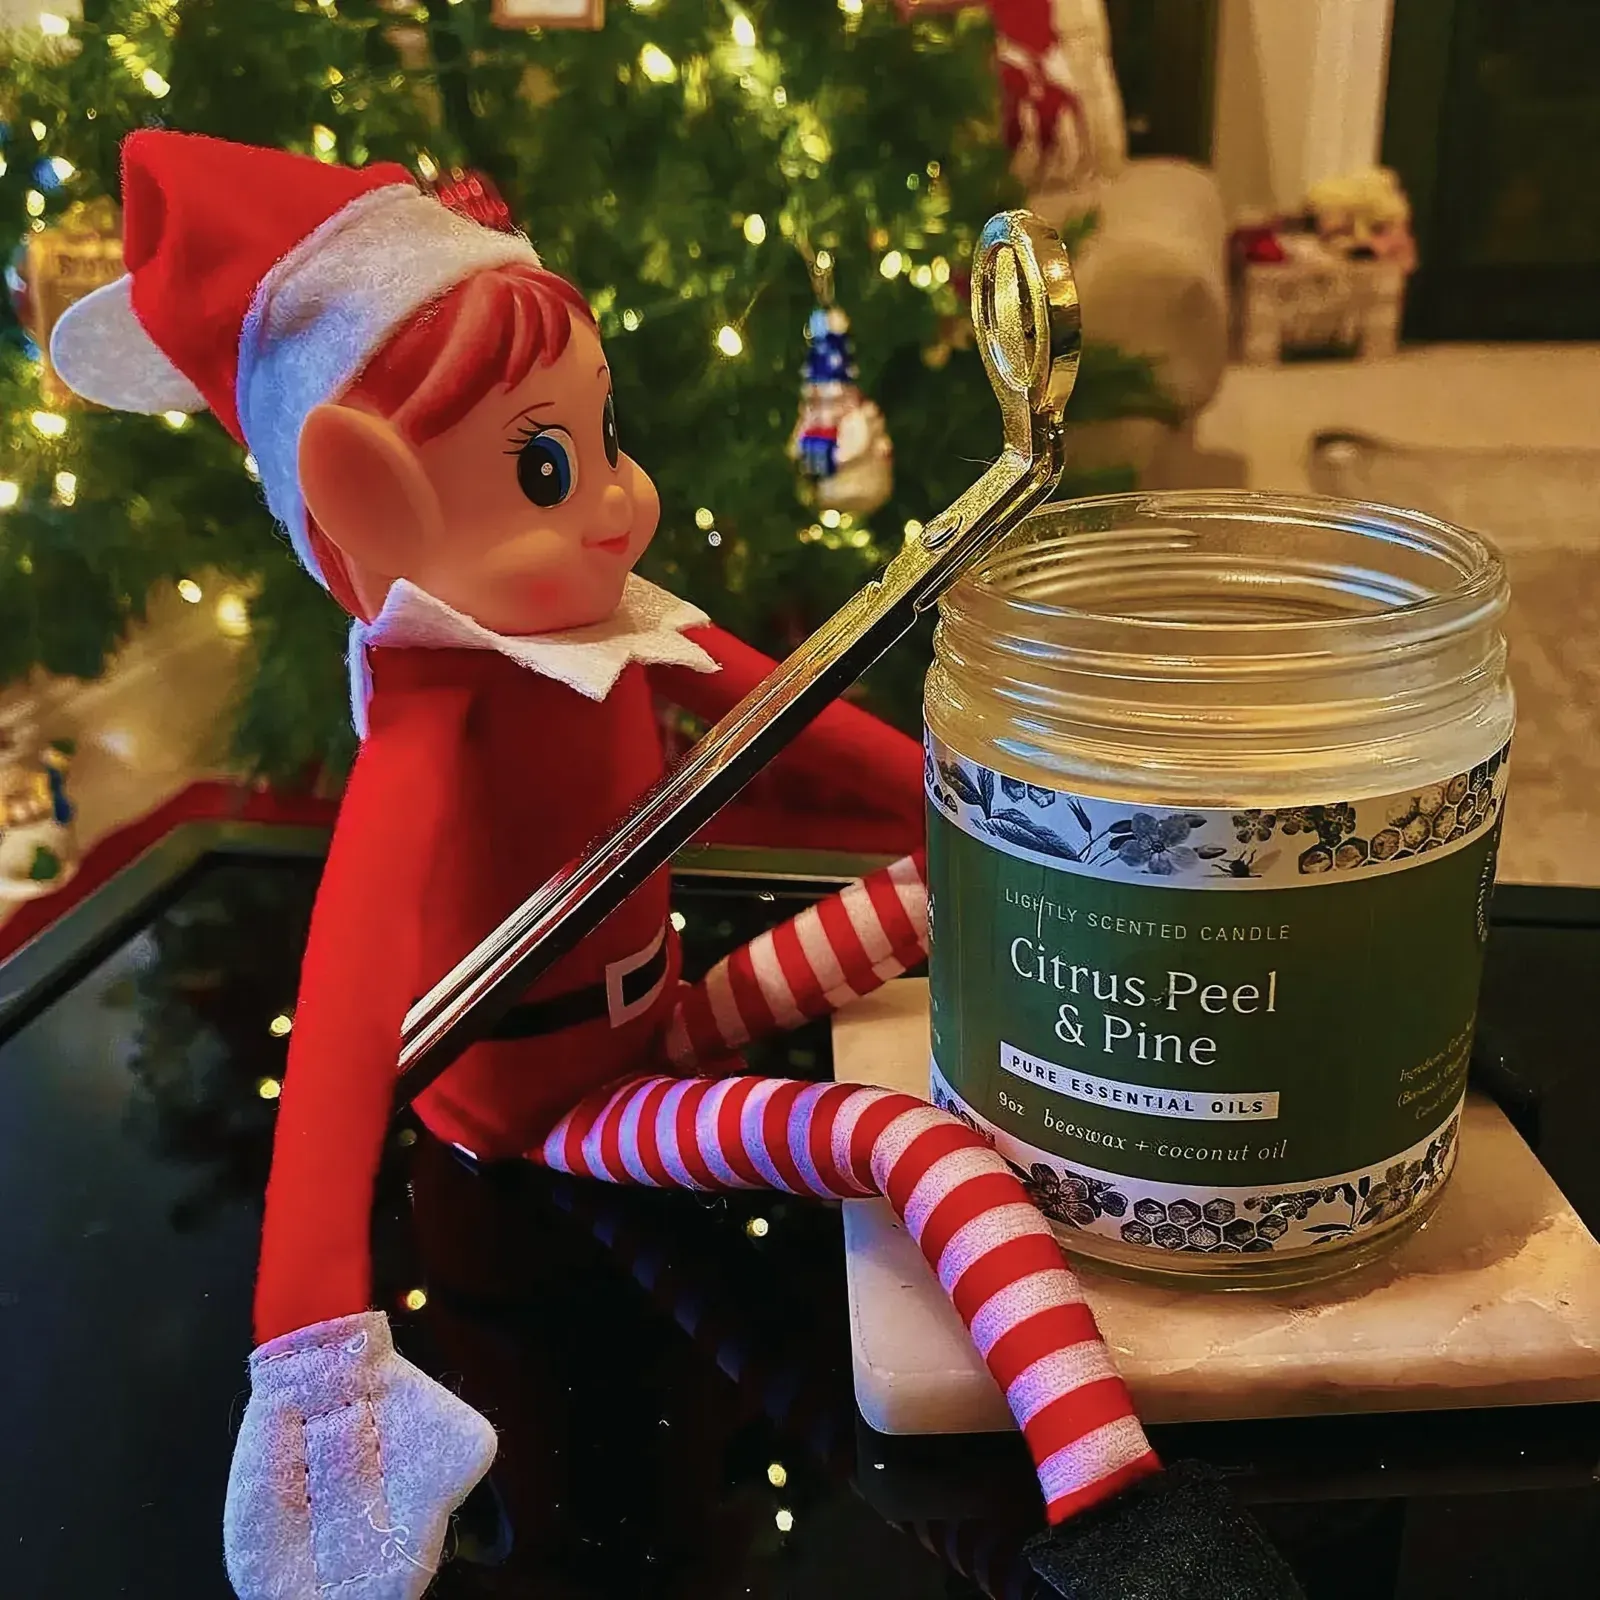 Festive scene featuring a toy elf playing a violin and a candle jar against a Christmas tree backdrop